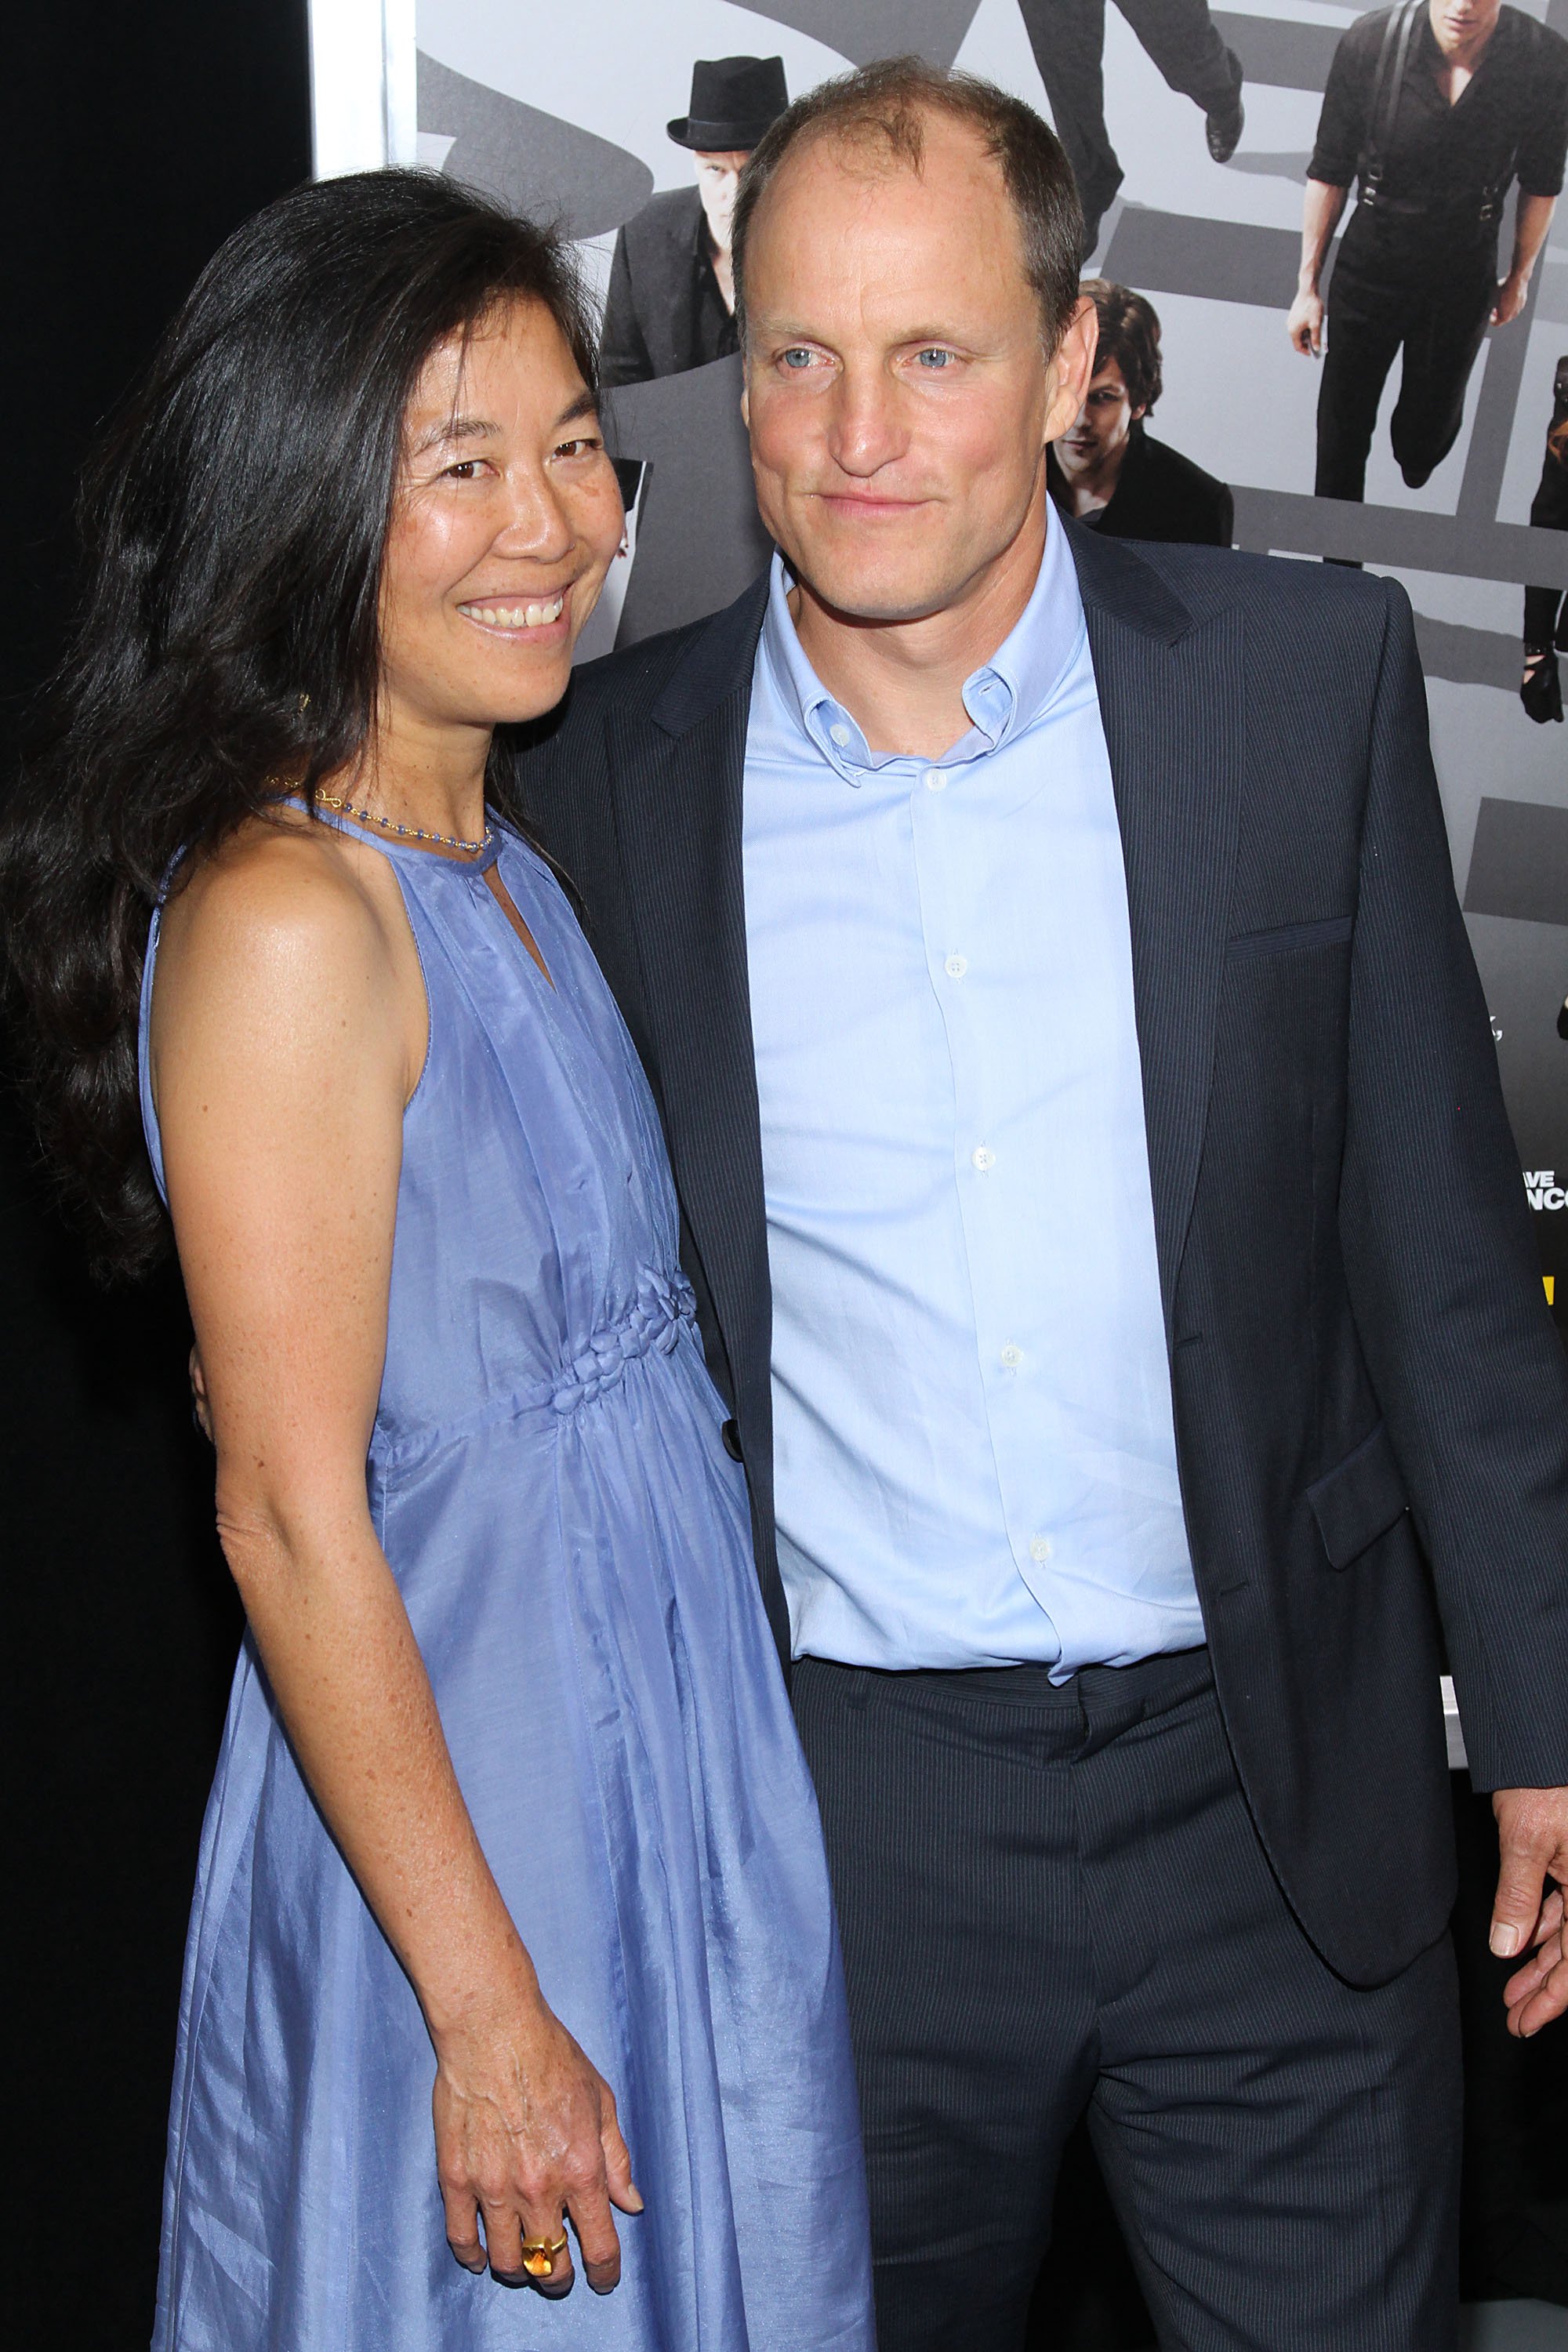 Woody Harrelson and wife Laura Louie attend the "Now You See Me" New York Premiere at AMC Lincoln Square Theater on May 21, 2013, in New York City. | Source: Getty Images.